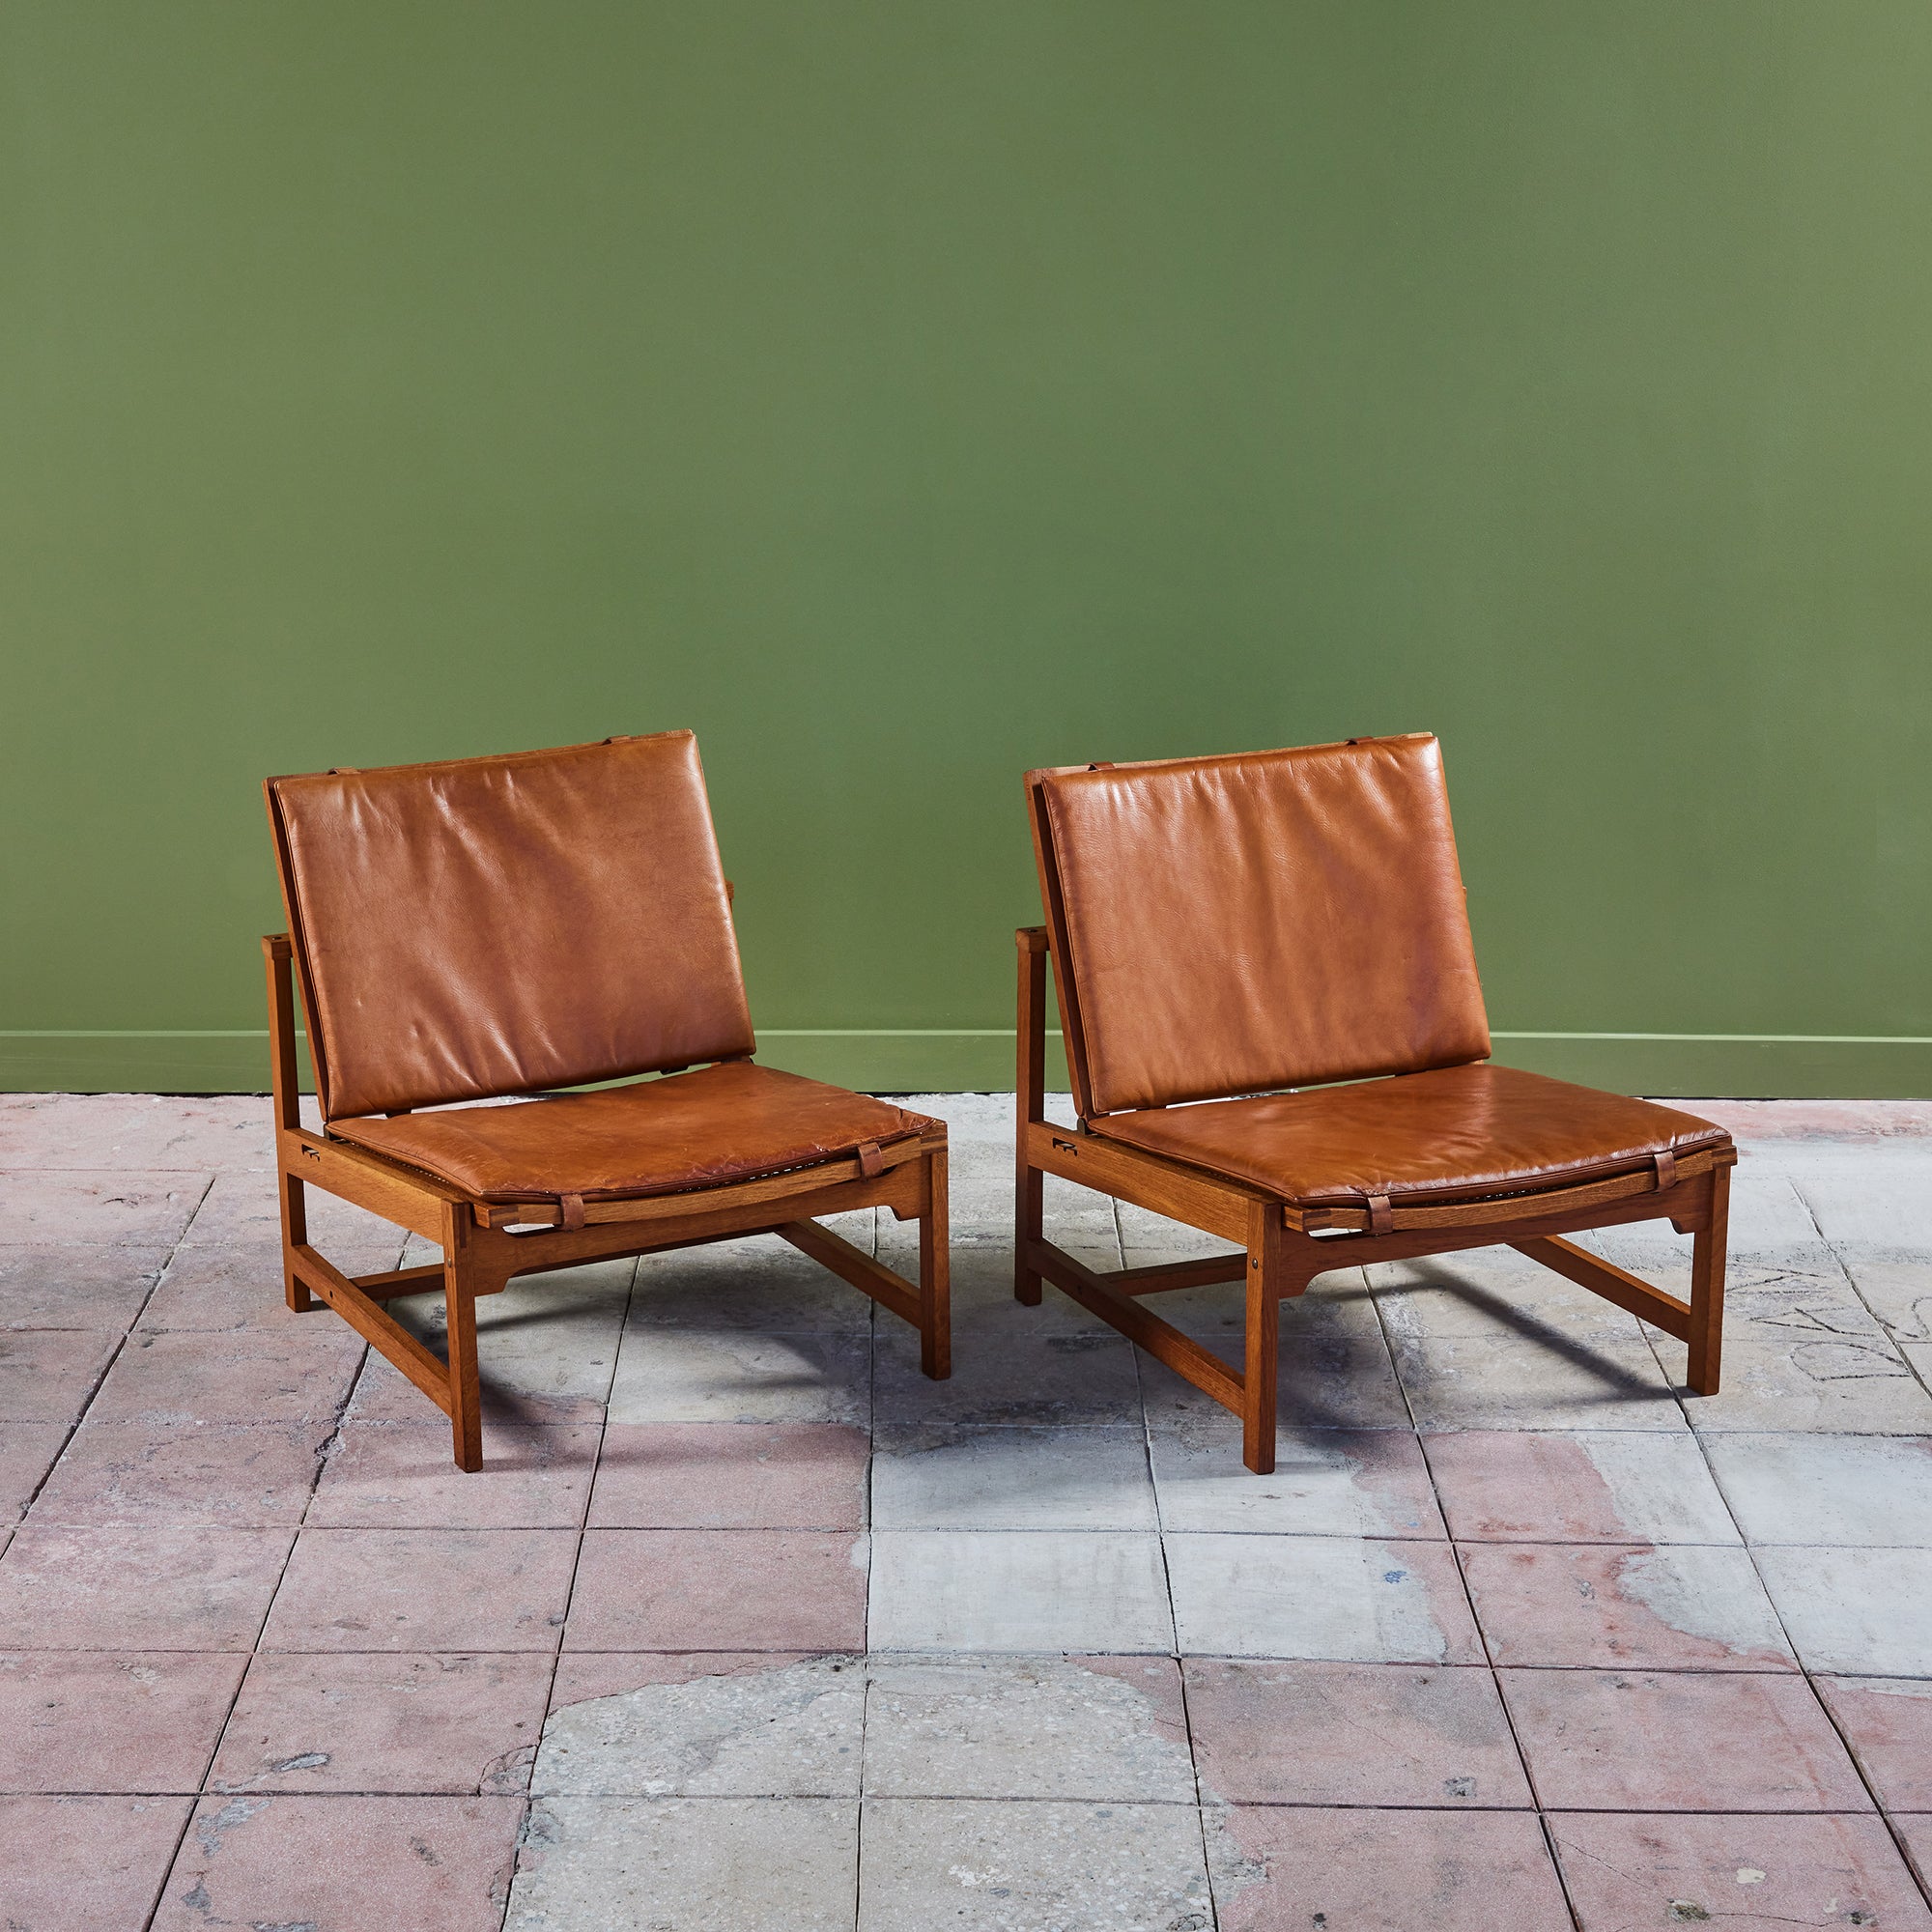 Pair of Arne Karlsen and Peter Hjort Leather and Cane Lounge Chairs